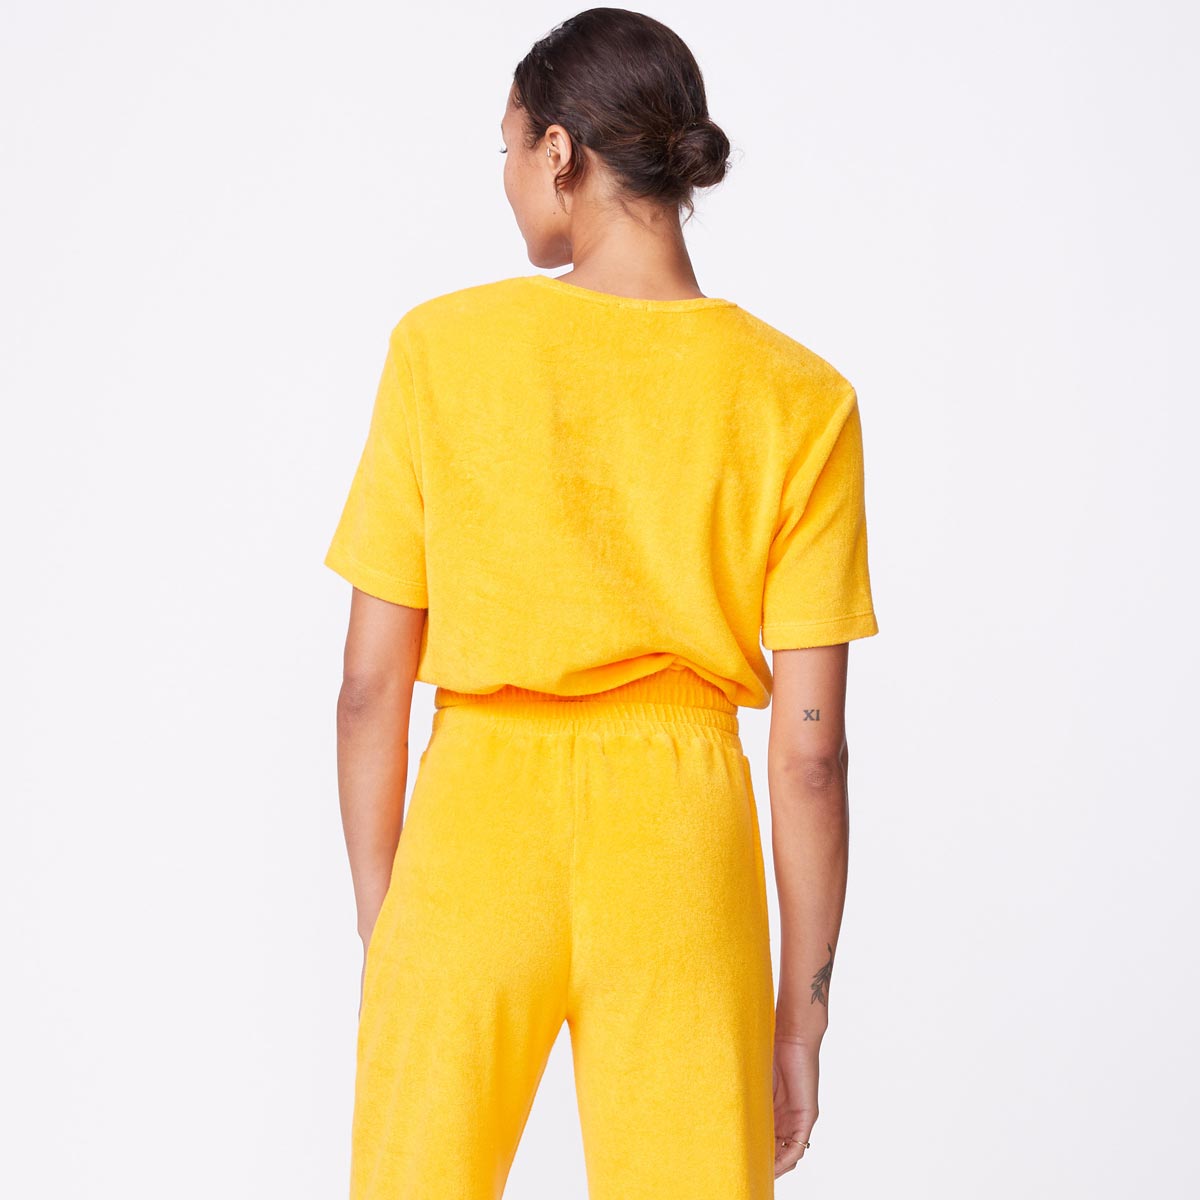 Back view of model wearing the terry cloth tee in marigold.